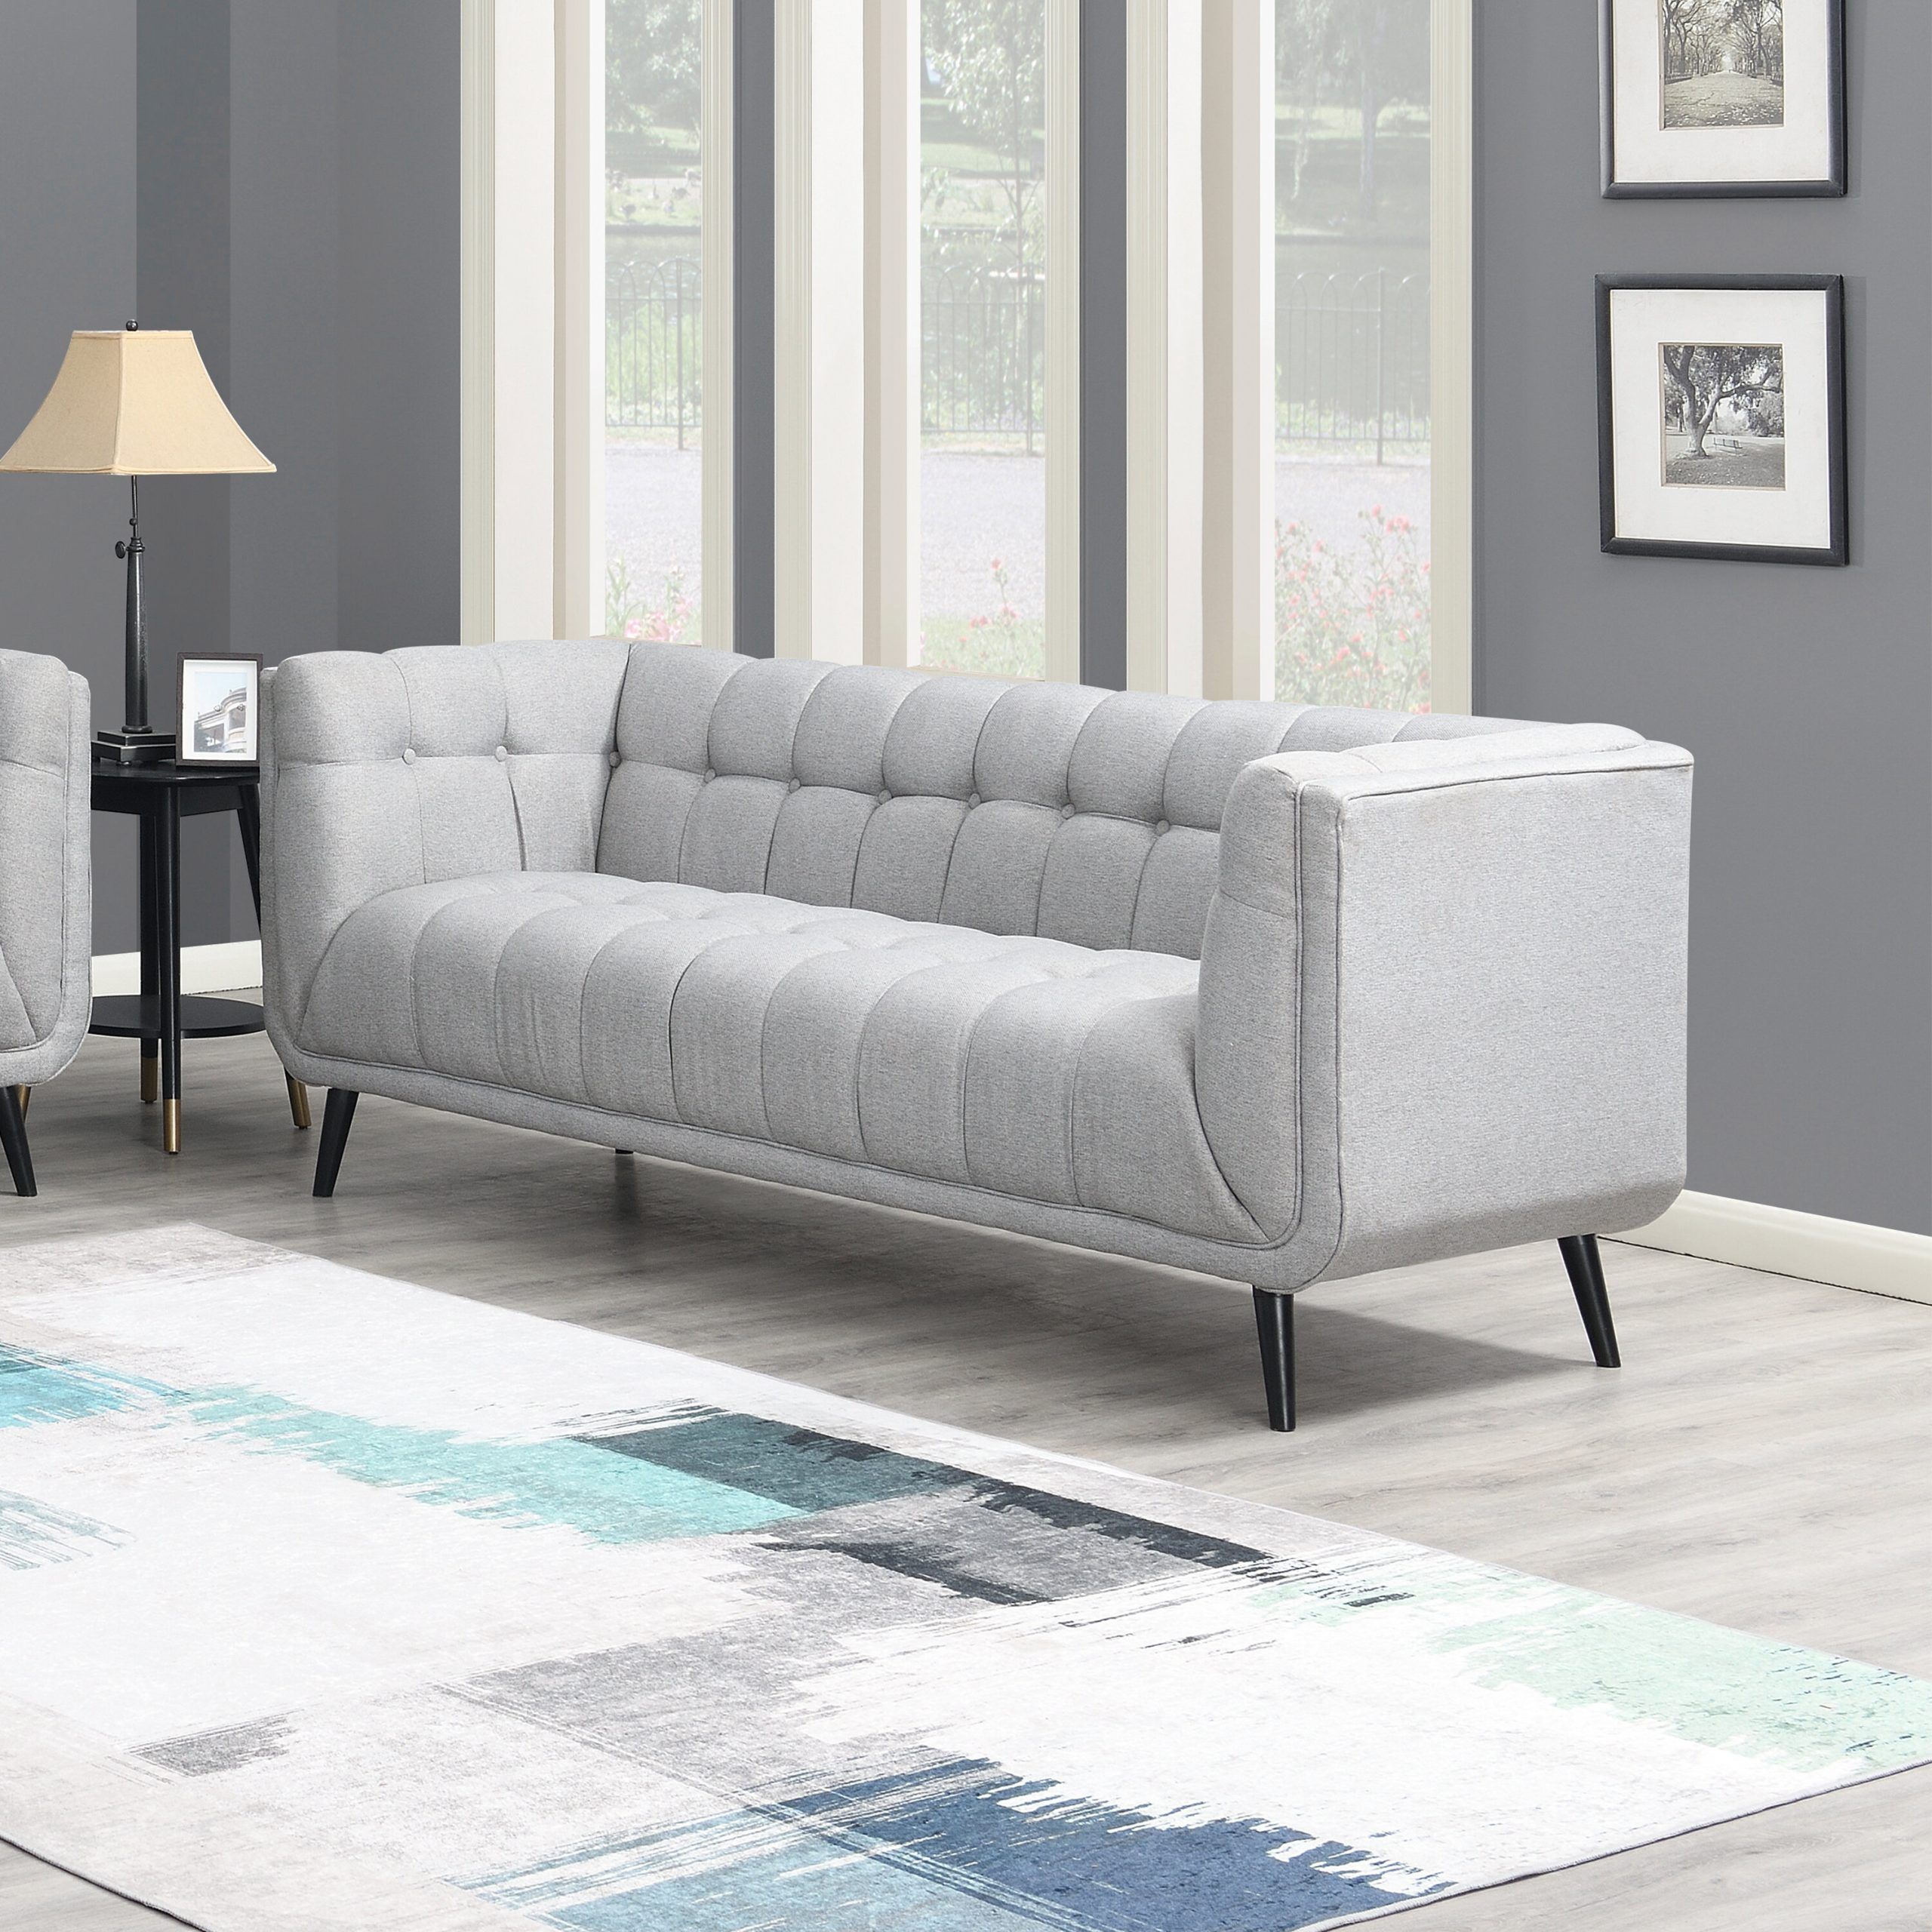 Corrigan Studio® Modern Mid Century Button Tufted Upholstered Sofa, Gray |  Wayfair Throughout Tufted Upholstered Sofas (Photo 6 of 15)